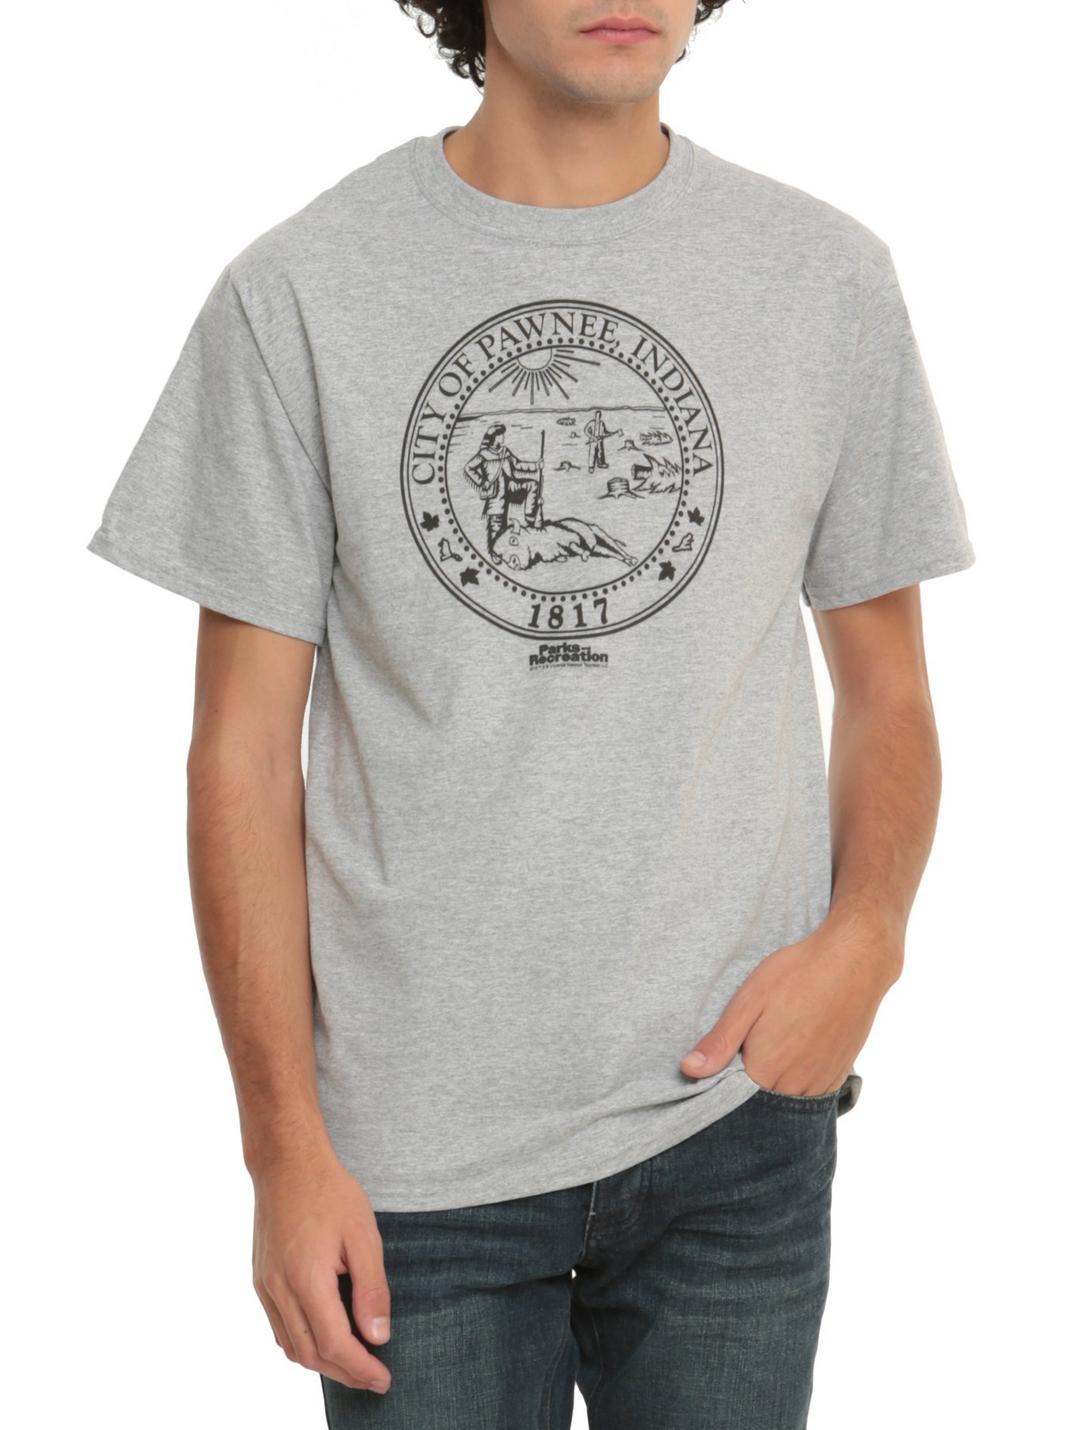 Parks And Recreation Pawnee Seal T-Shirt, BLACK, hi-res